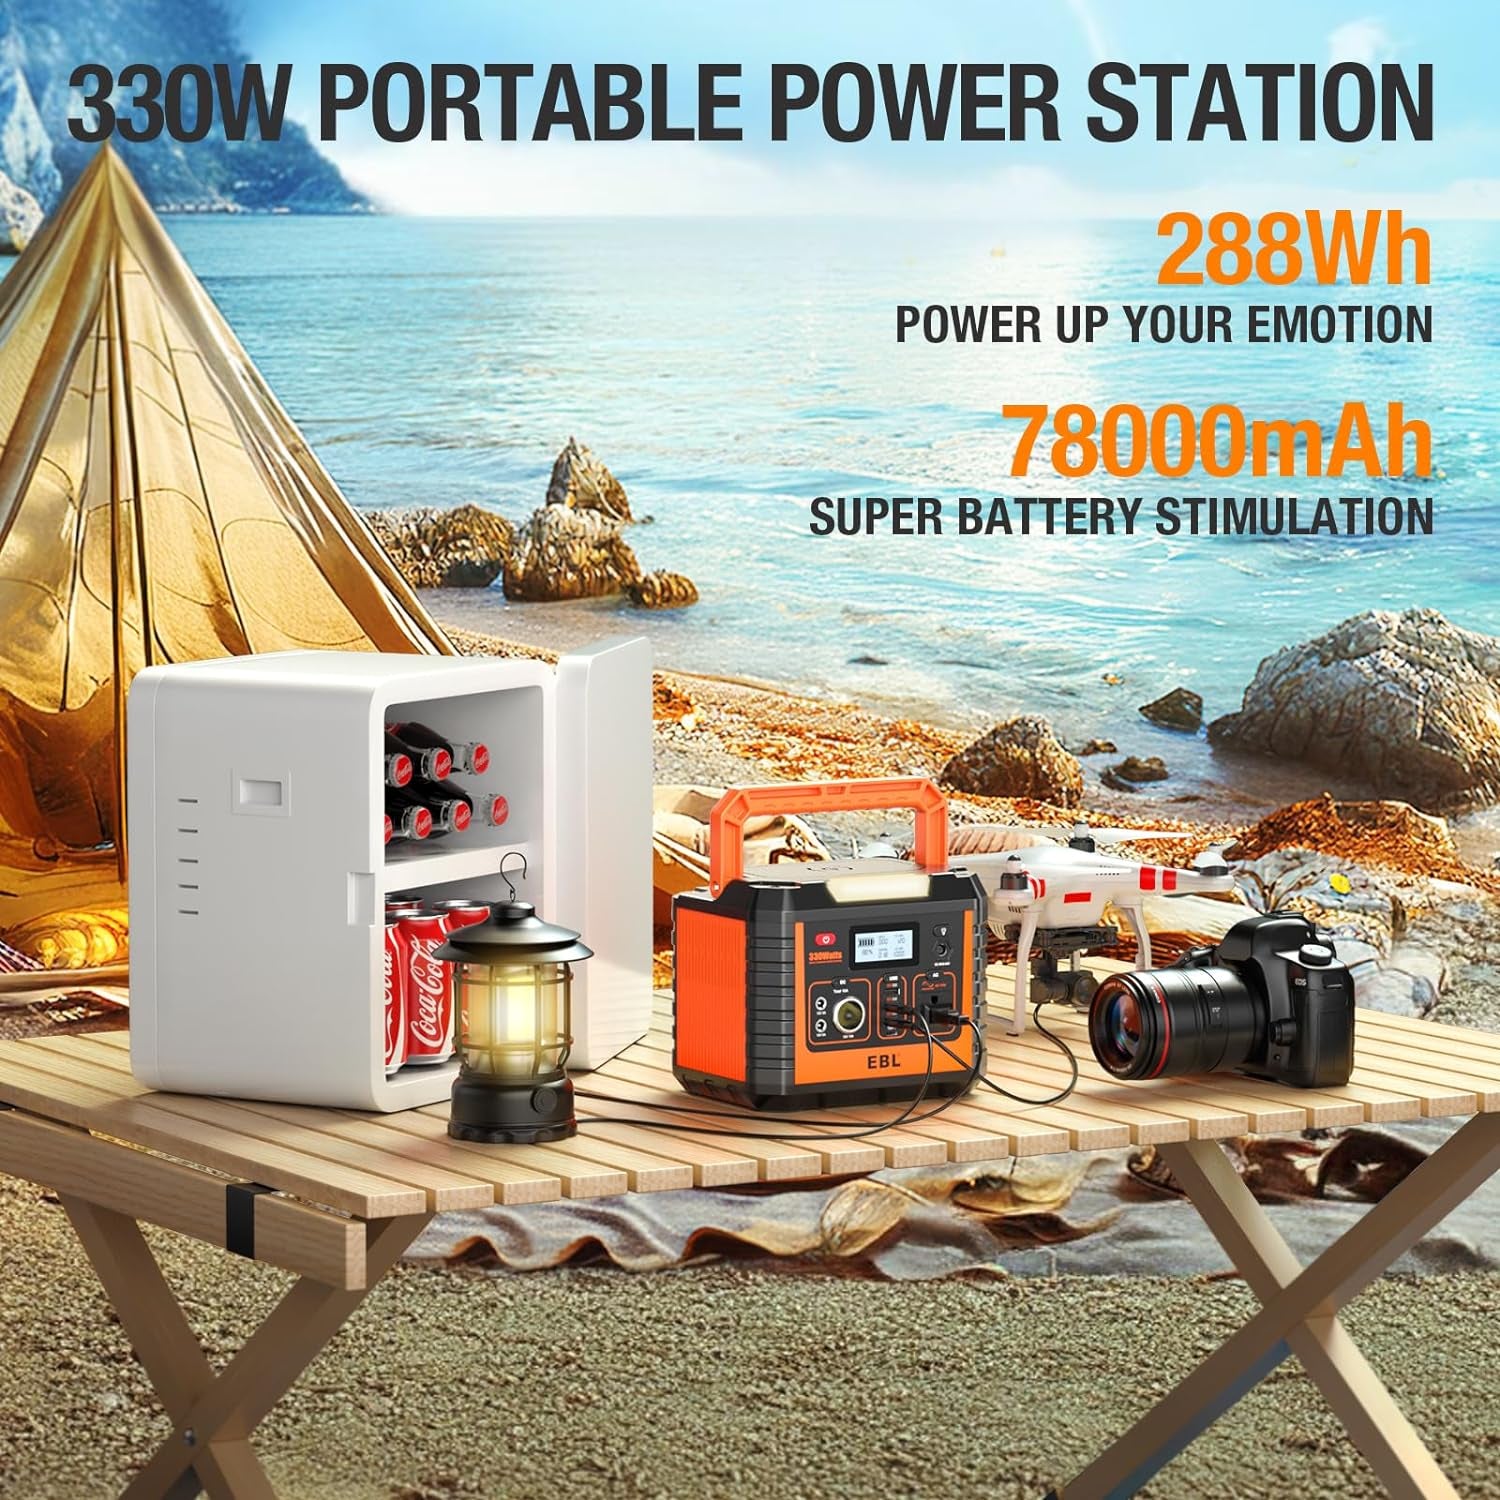 Portable Power Station 300, 110V/330W Pure Sine Wave Solar Generator (Solar Panel Not Included) - Peak 600W Backup Lithium Batteries AC Outlet for Blackout Outdoors Camping Hunting Travel